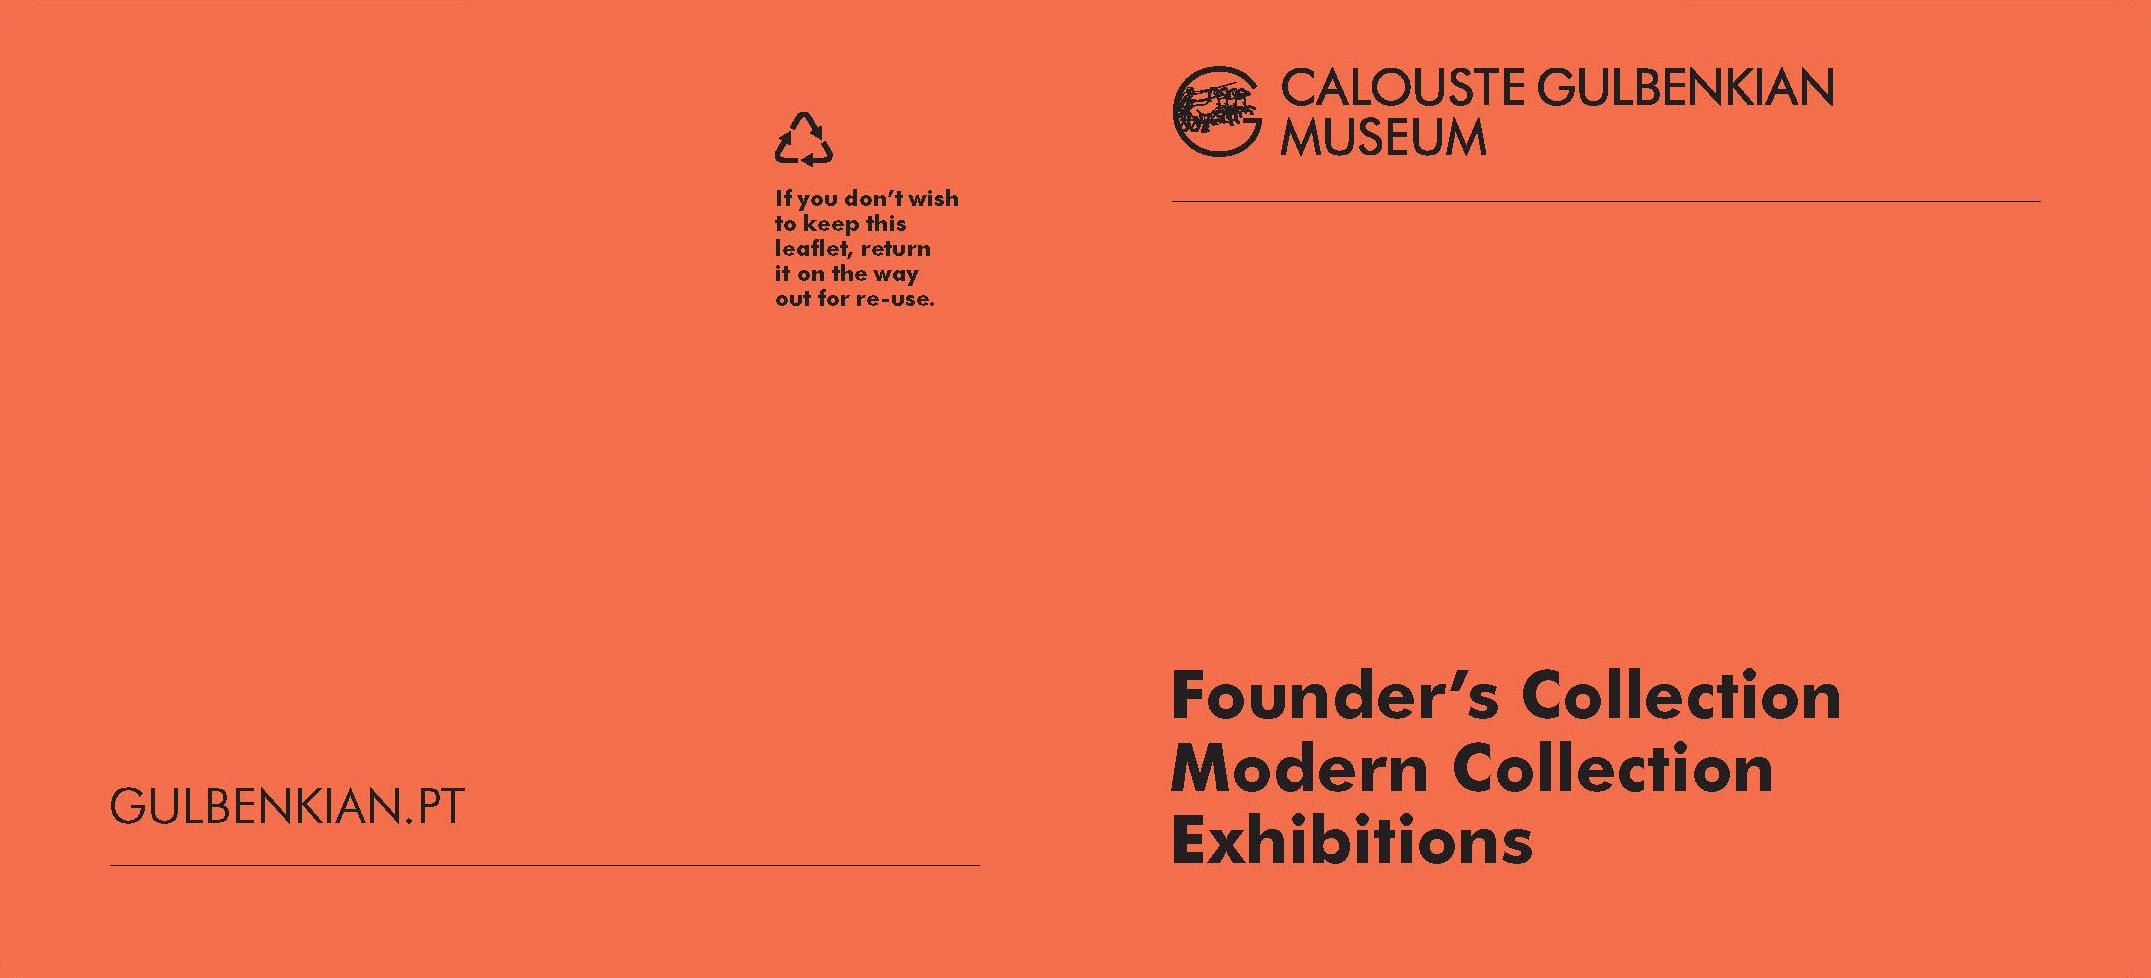 Founder's Collection. Modern Collection. Jan – Apr 2020